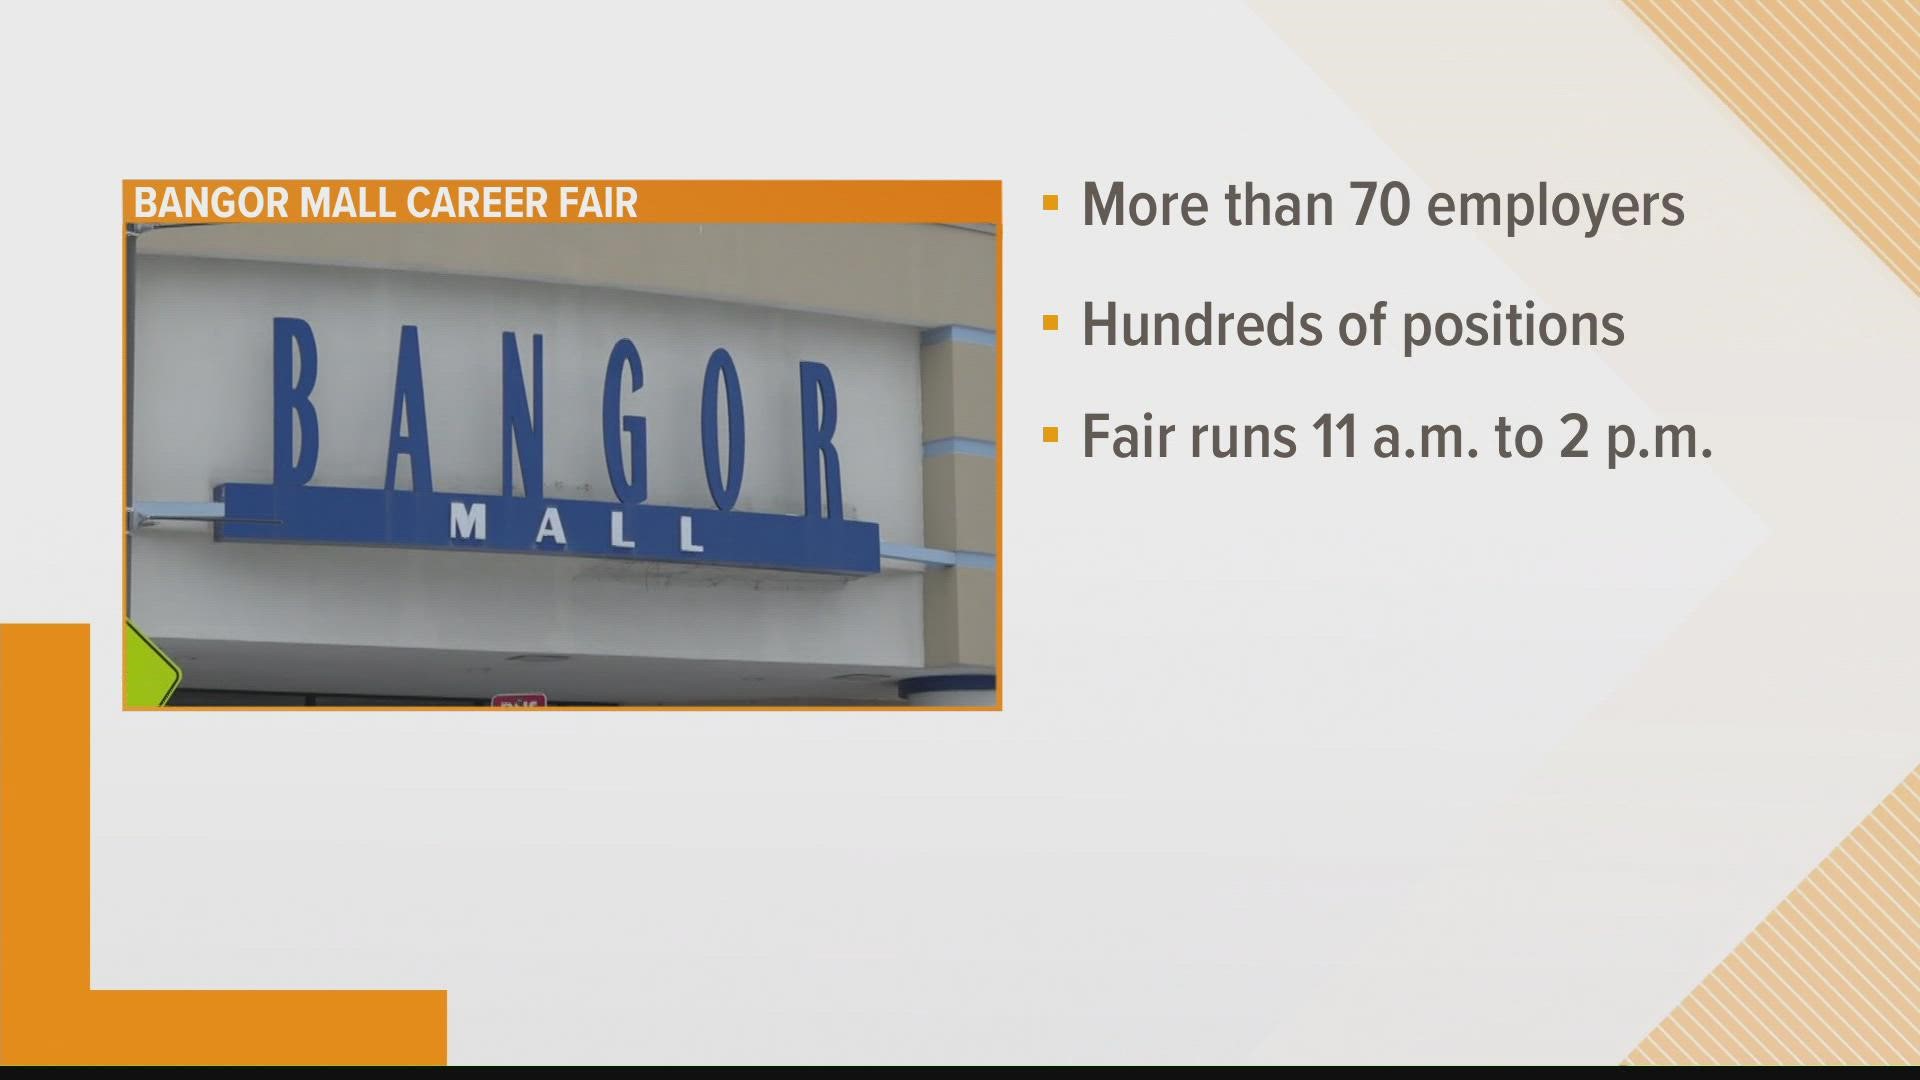 More than 70 employers are set to be at the Bangor Mall offering hundreds of opportunities for job seekers.